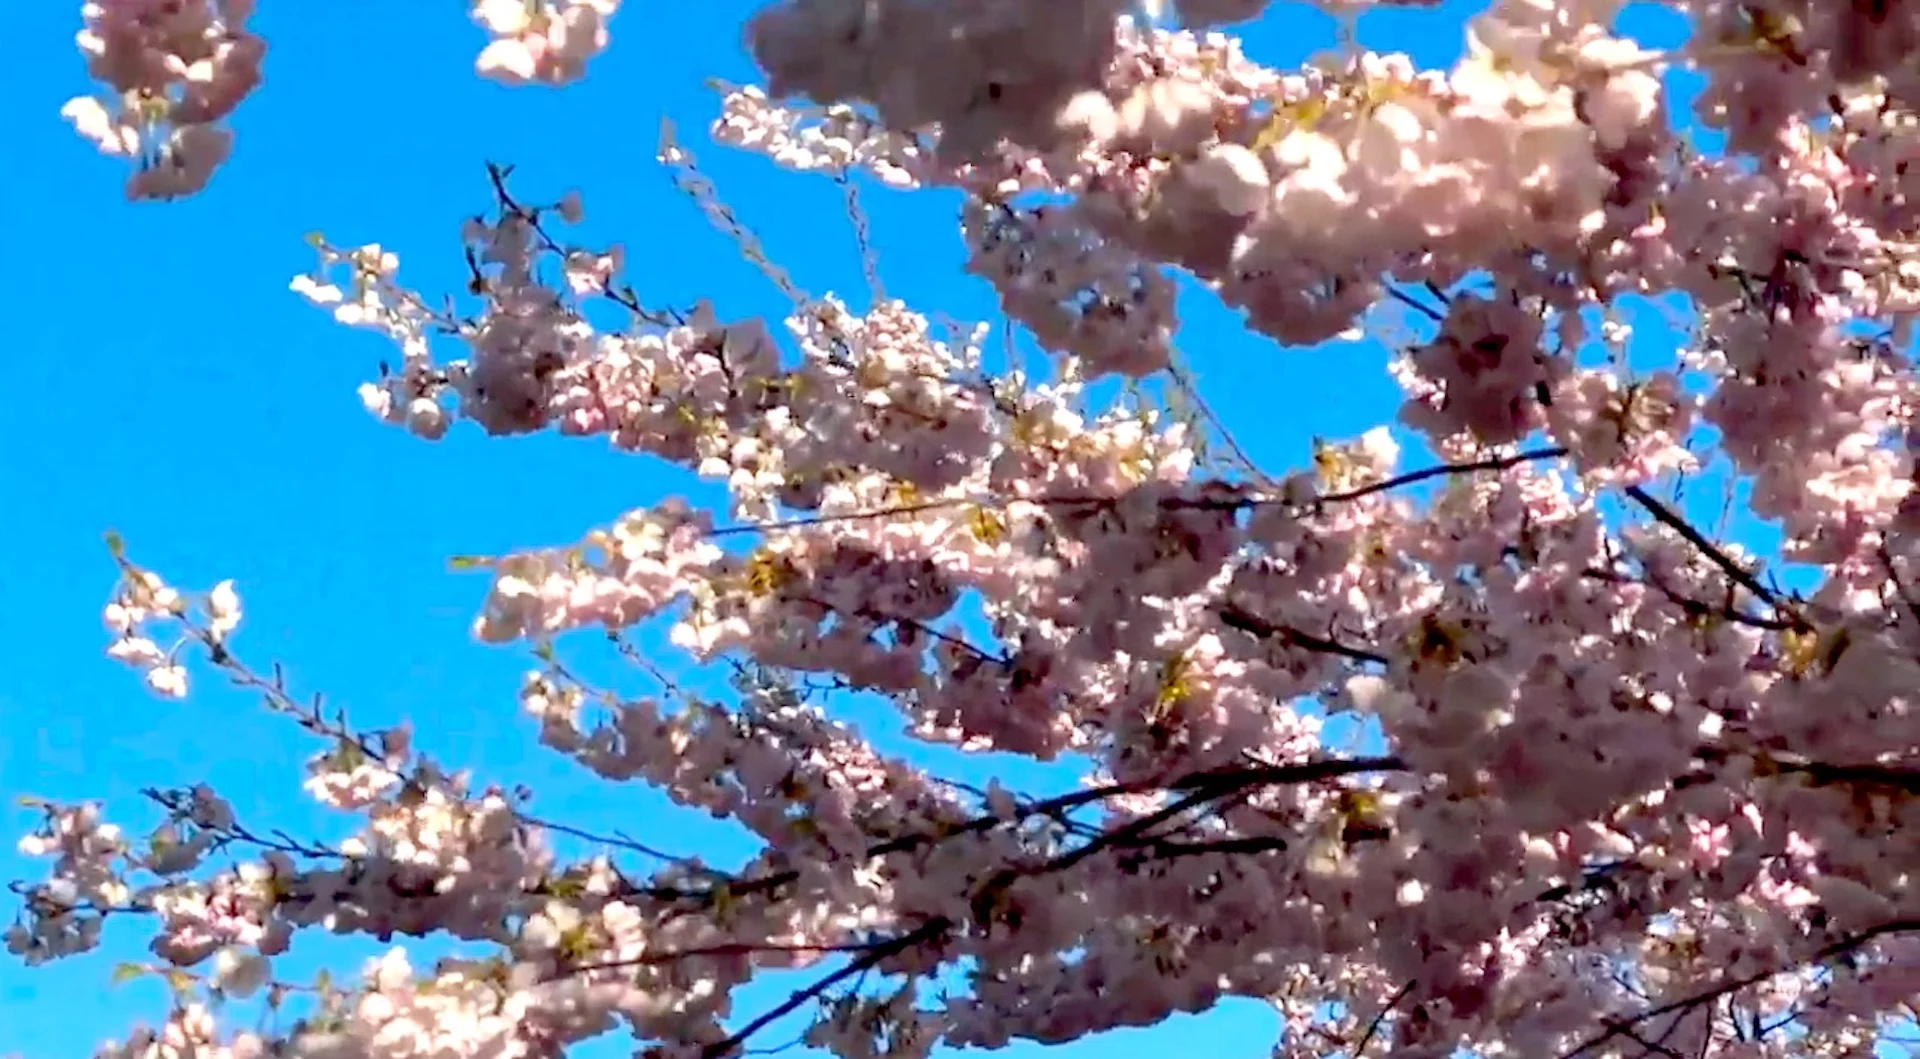 Spring flourishing with colours as cherry blossoms come to life